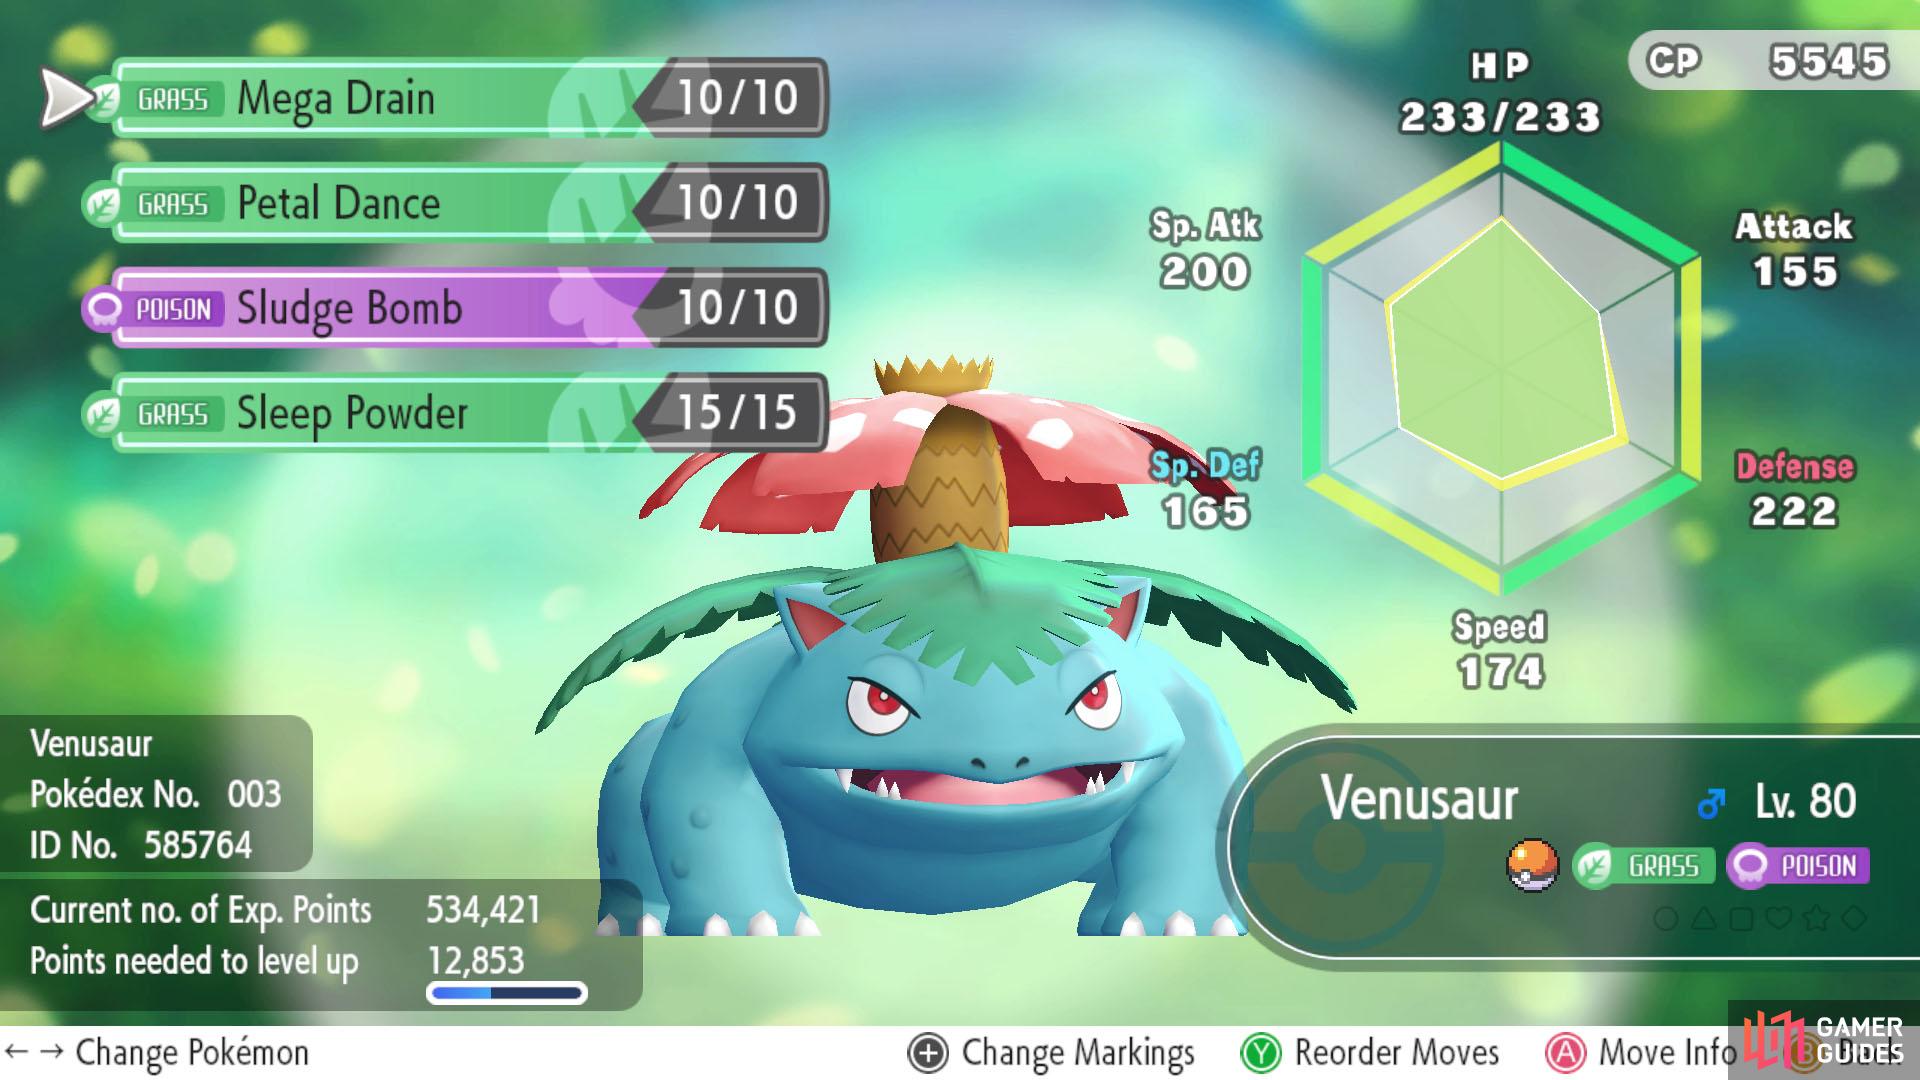 We fed our Venusaur a small amount of candies.